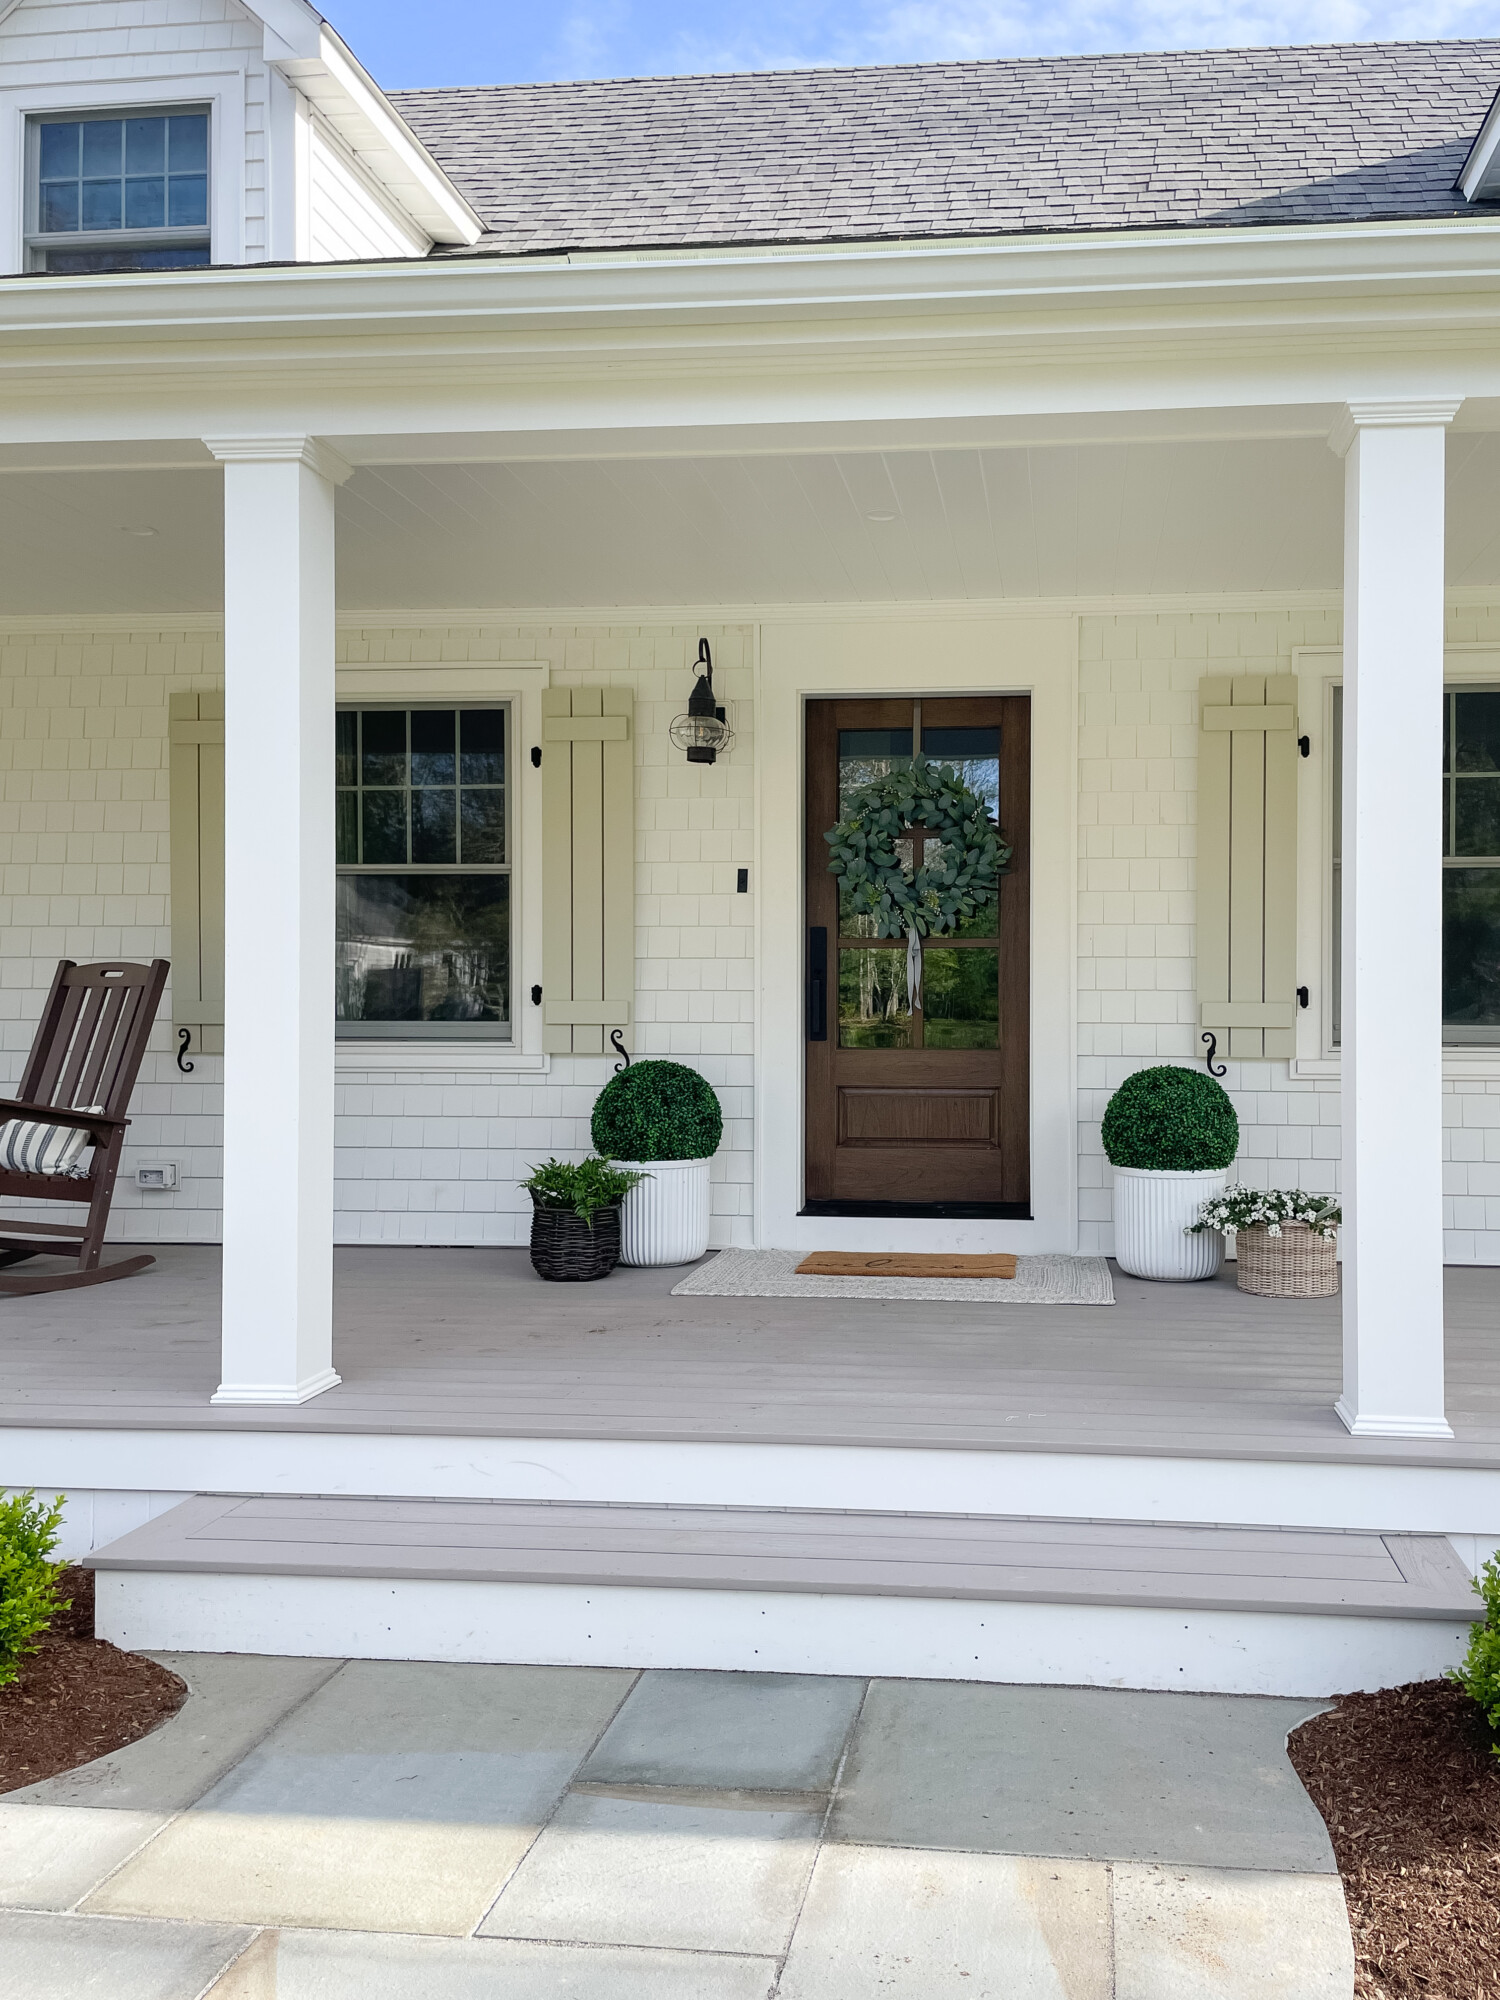 spring front porch styling | spring, spring front porch, spring home, home decor, front porch, wreath, hanging wreath, planters, faux greenery, decor, basket, flowers, walkway, blue stone